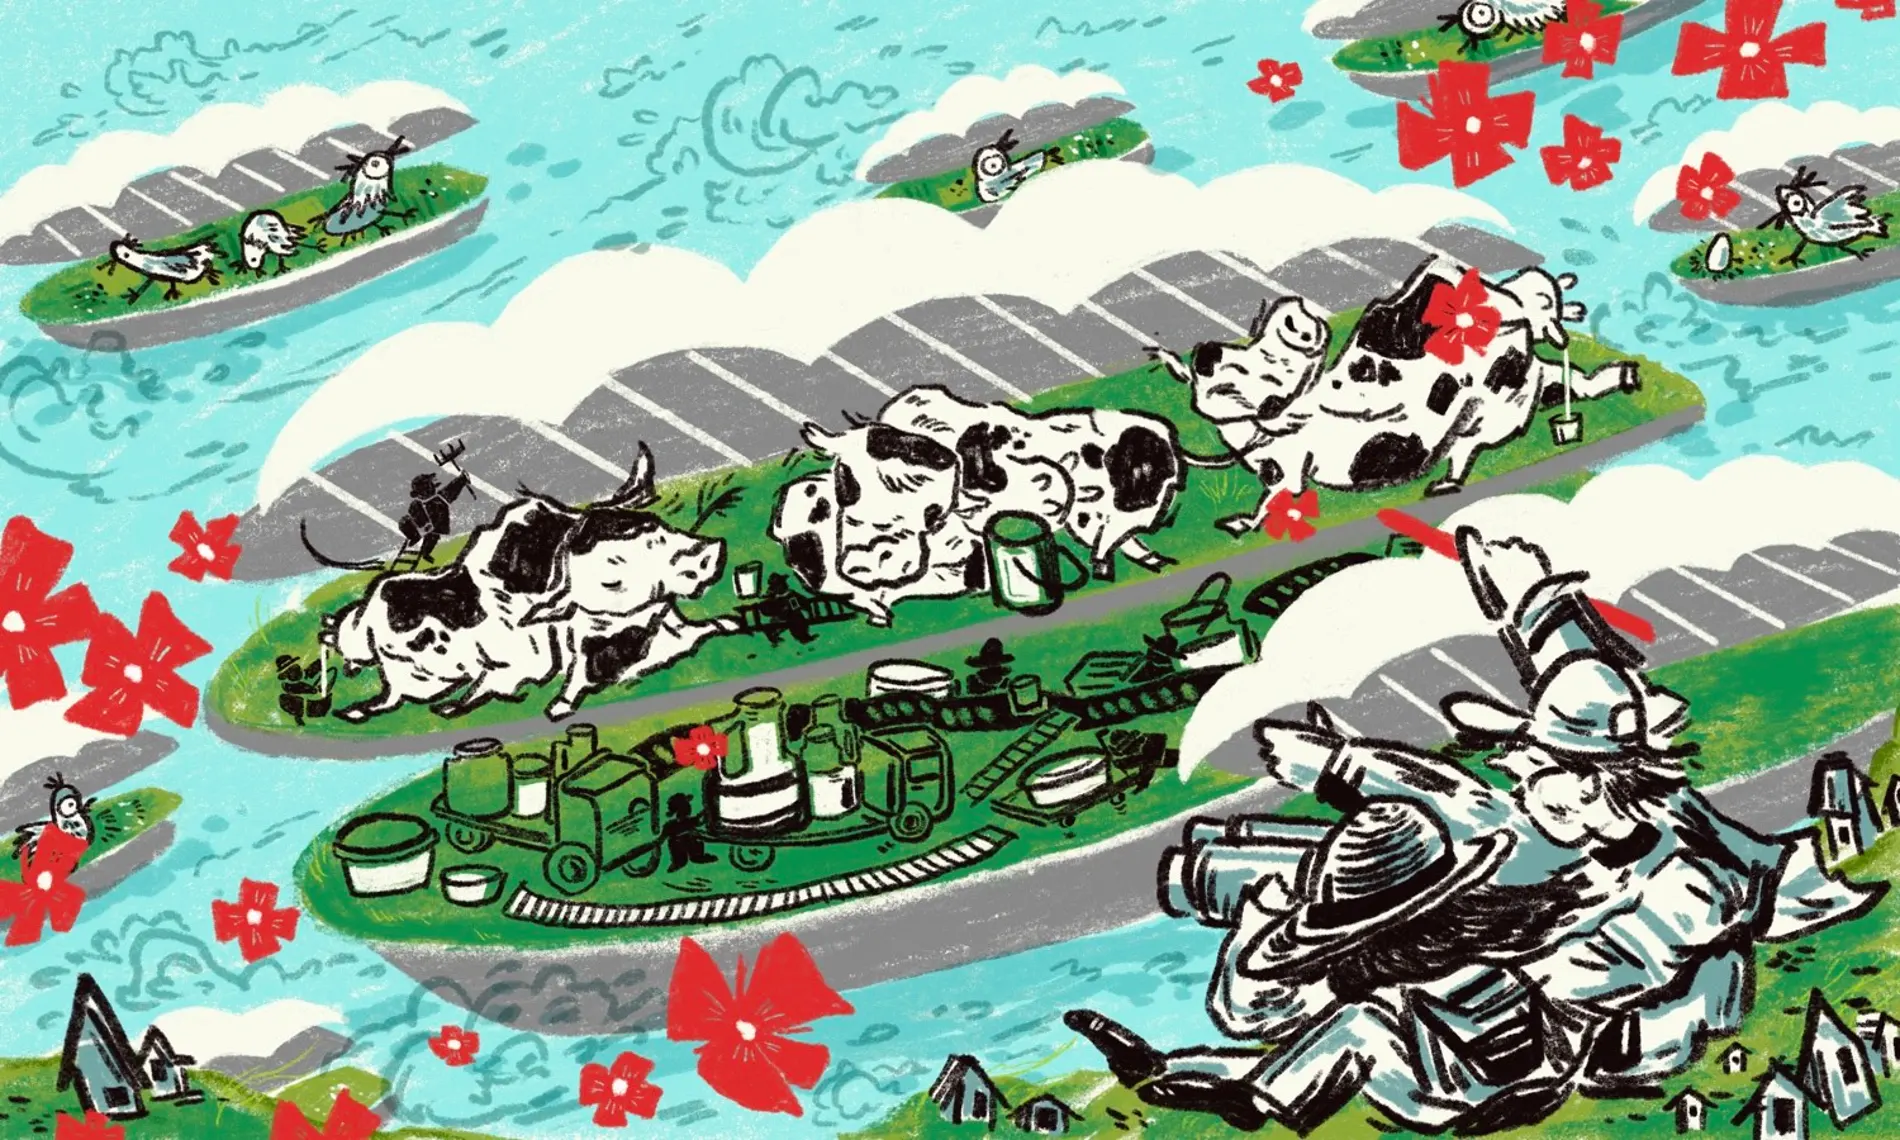 Cows at Floating Farm nourish the local community without using any land. Illustration: Yuanyuan Zhou/The Guardian